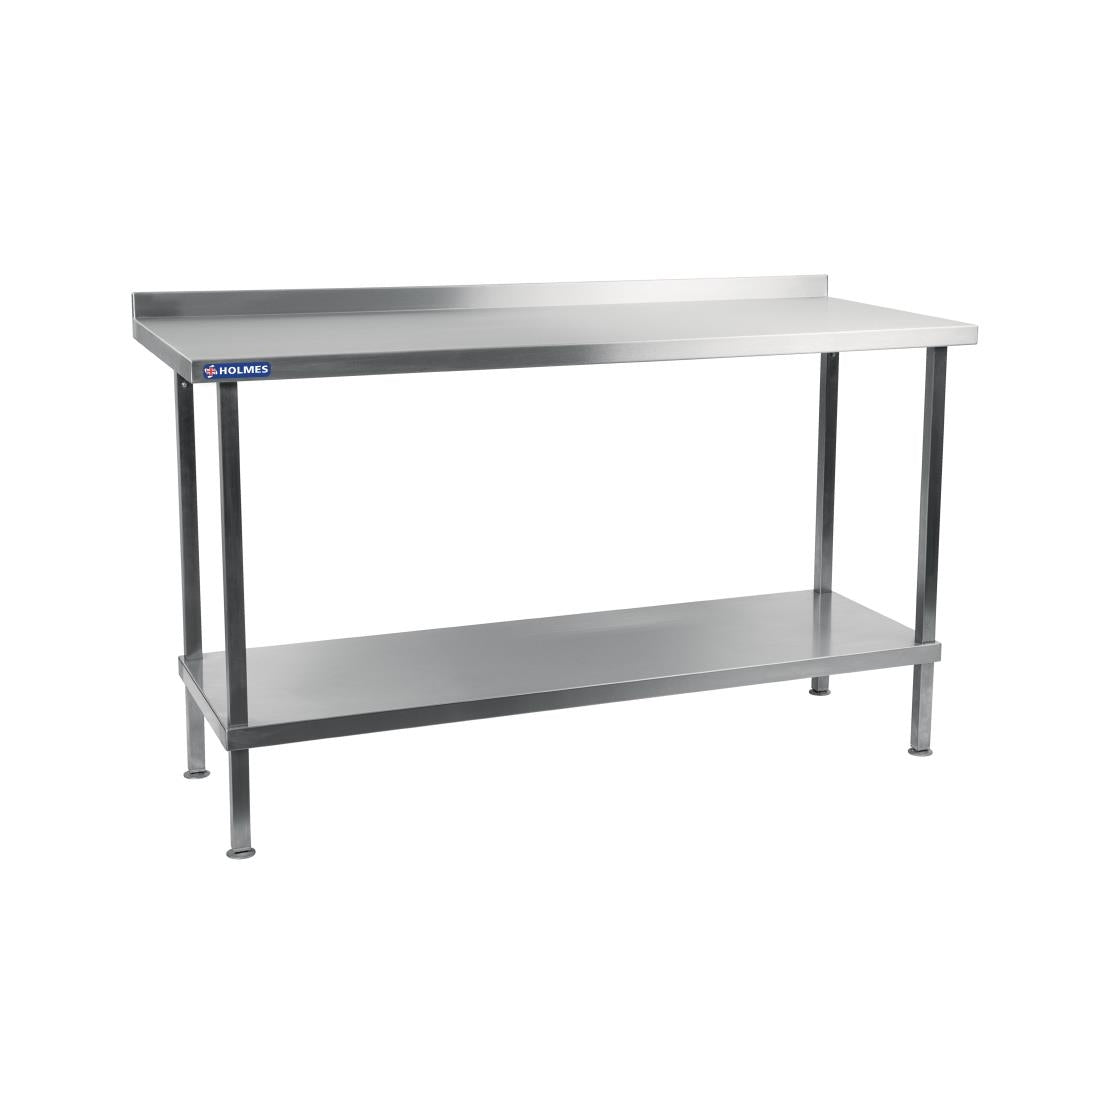 DR037 Holmes Stainless Steel Wall Table 1500mm JD Catering Equipment Solutions Ltd